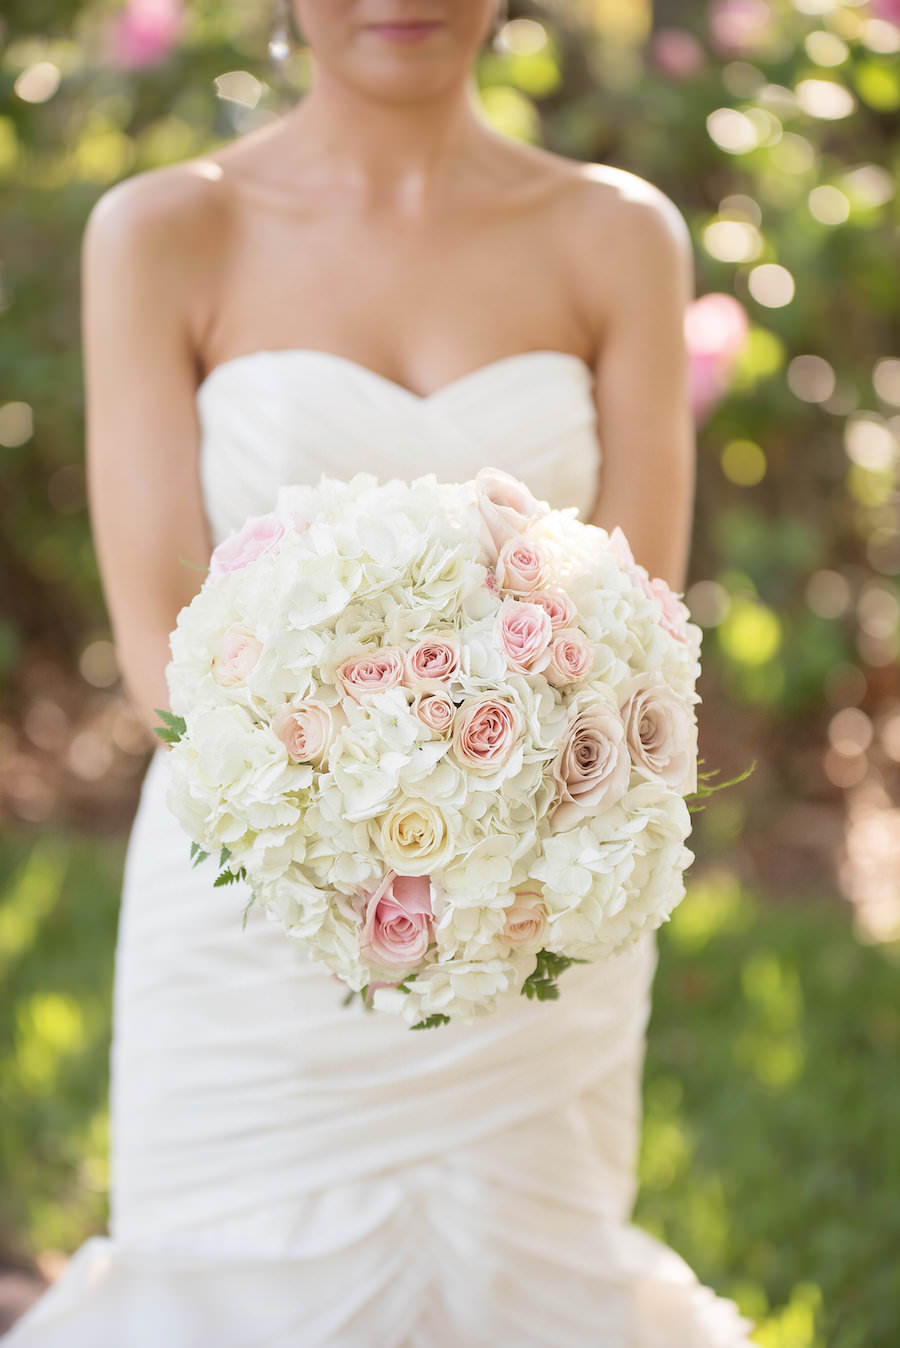 Outdoor, Bridal Wedding Portrait in Strapless Sweetheart Wedding Dress and Pink and Ivory Floral Wedding Bridal Bouquet